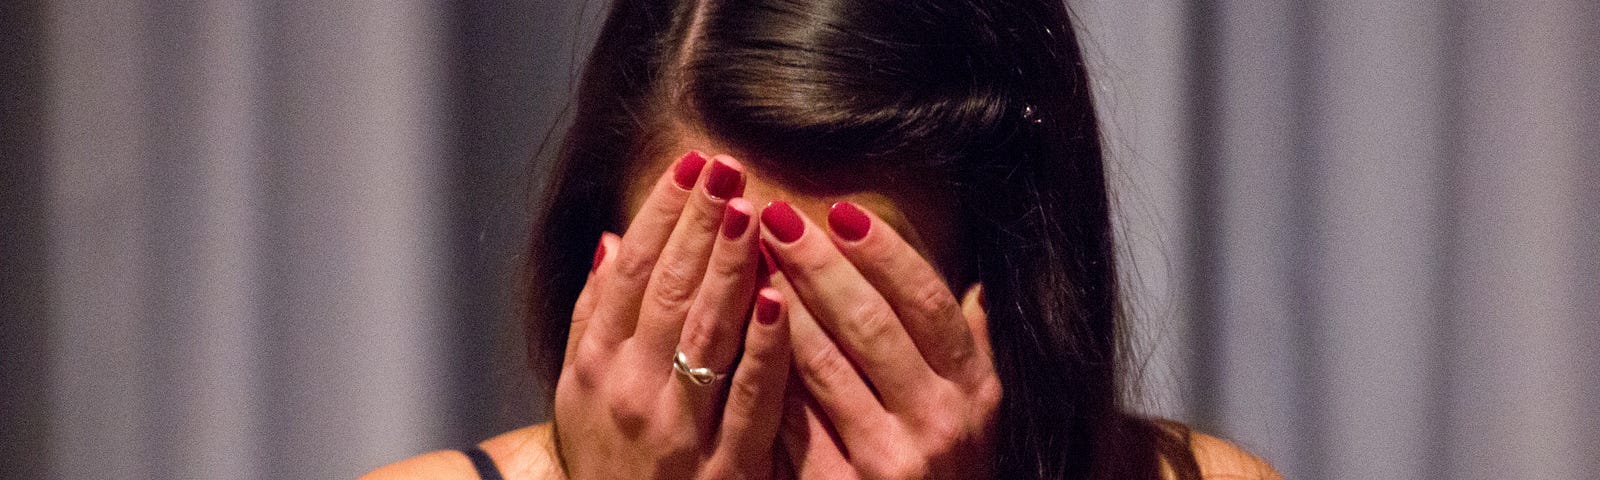 Woman shows embarrassment by cover her face with her hands